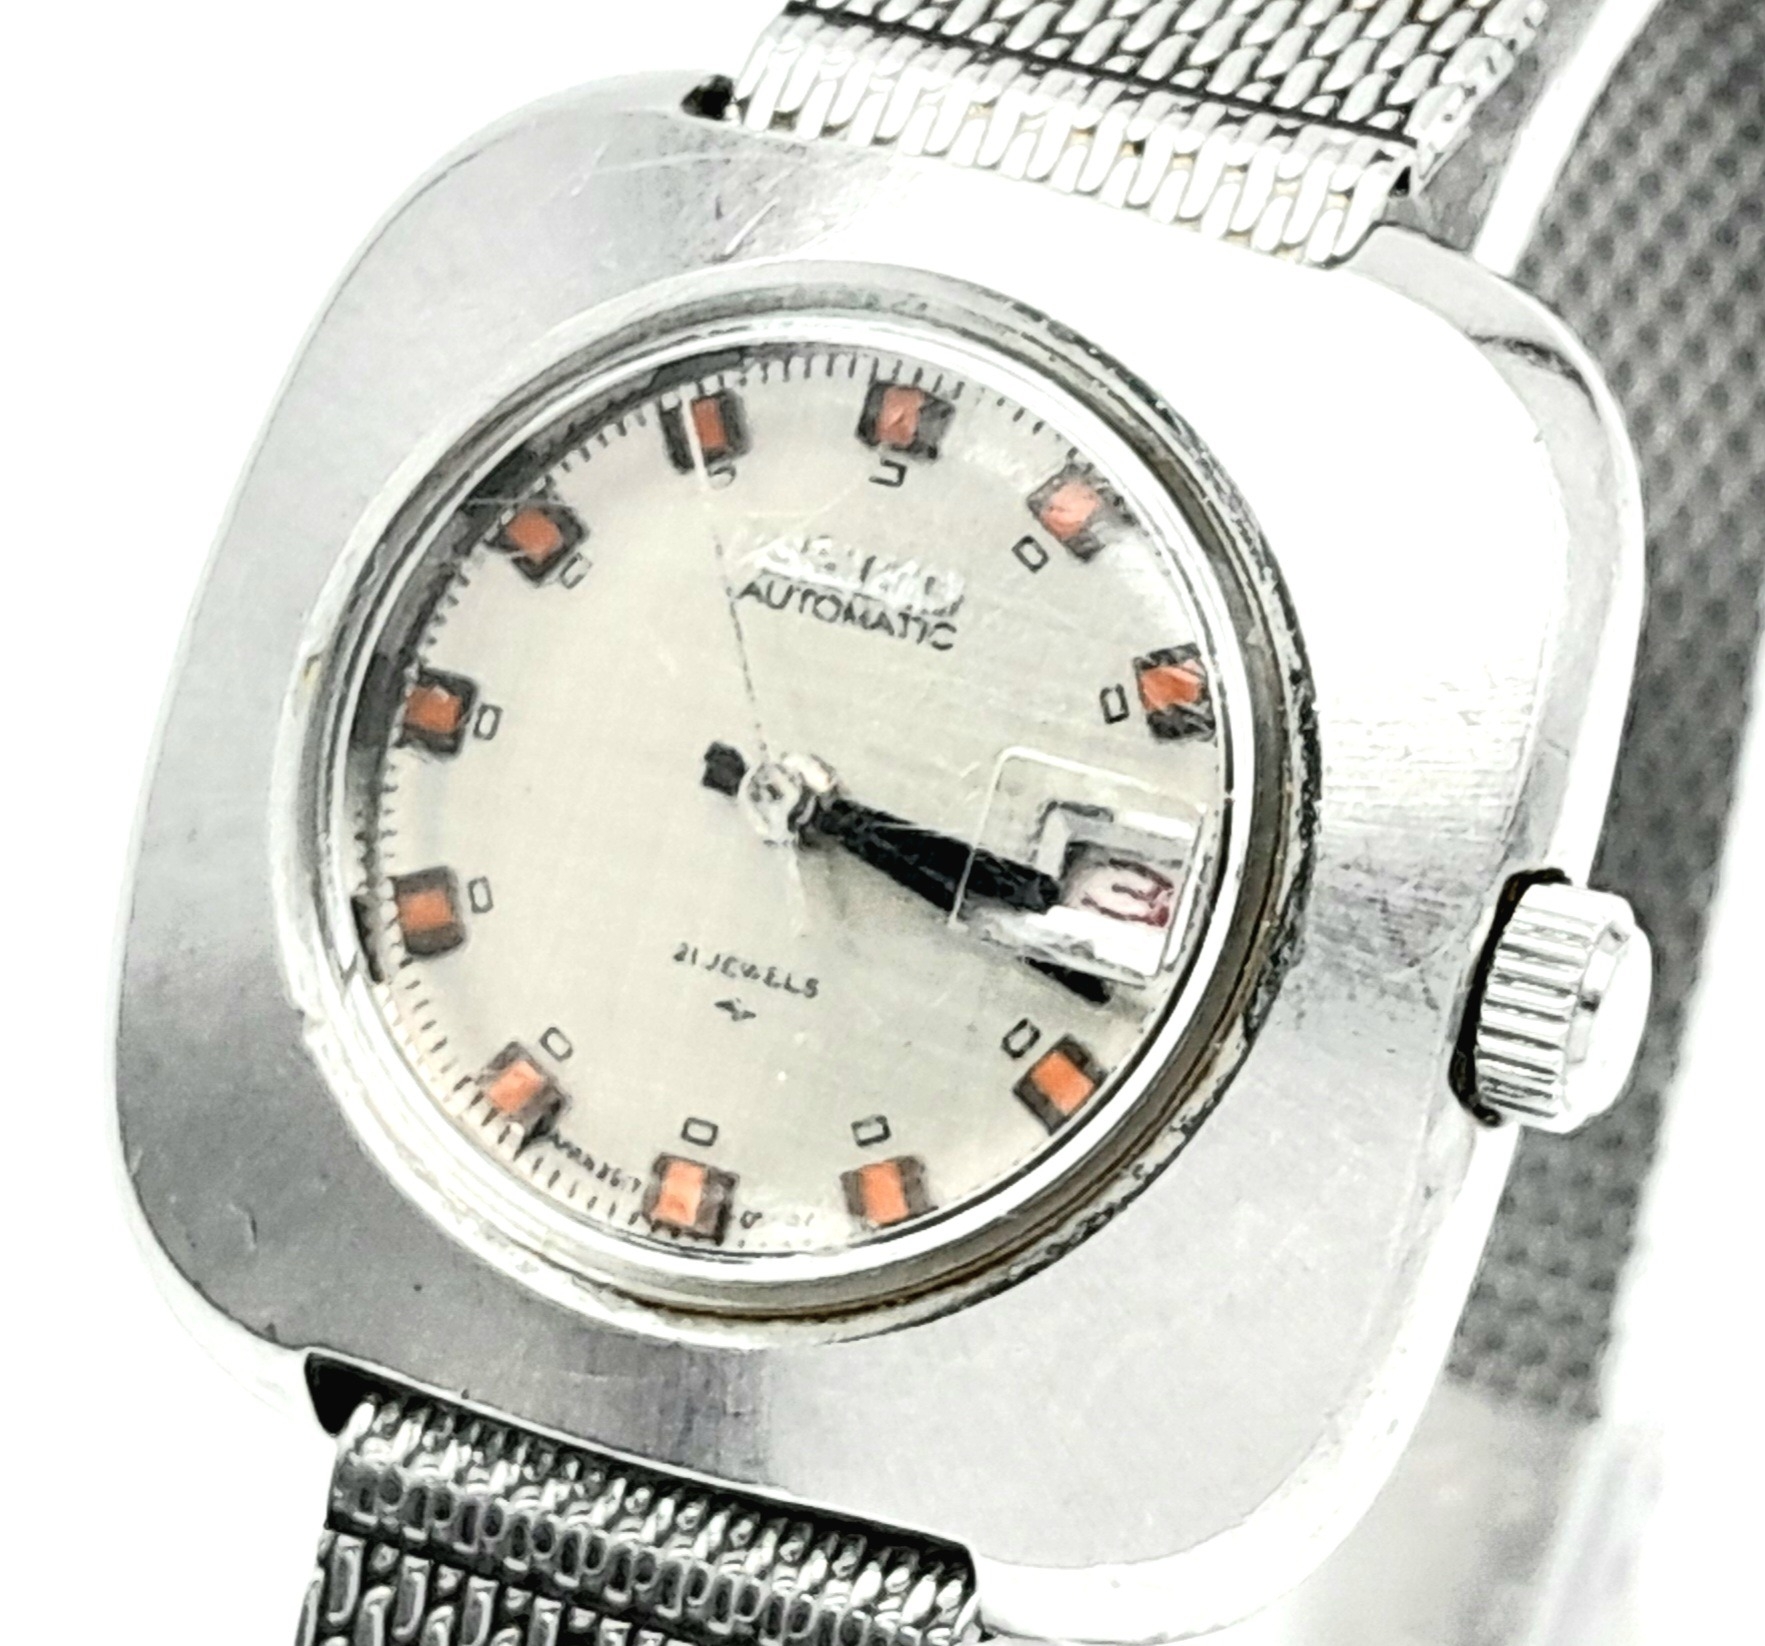 A Vintage Seiko Automatic Ladies Watch. Stainless steel bracelet and case - 29mm. Model 2517-0390. - Image 3 of 5